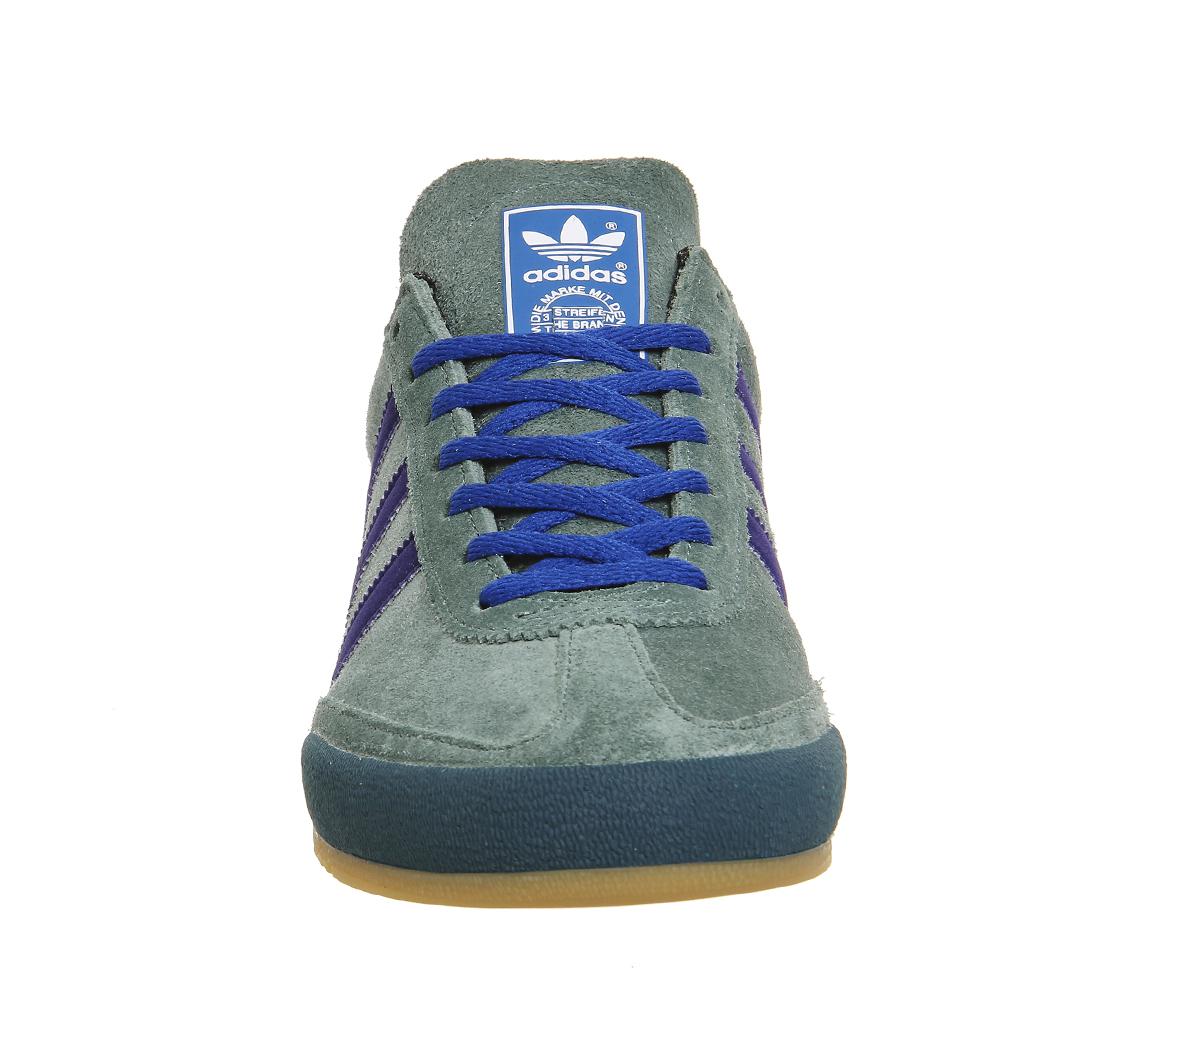 adidas jeans 2 green